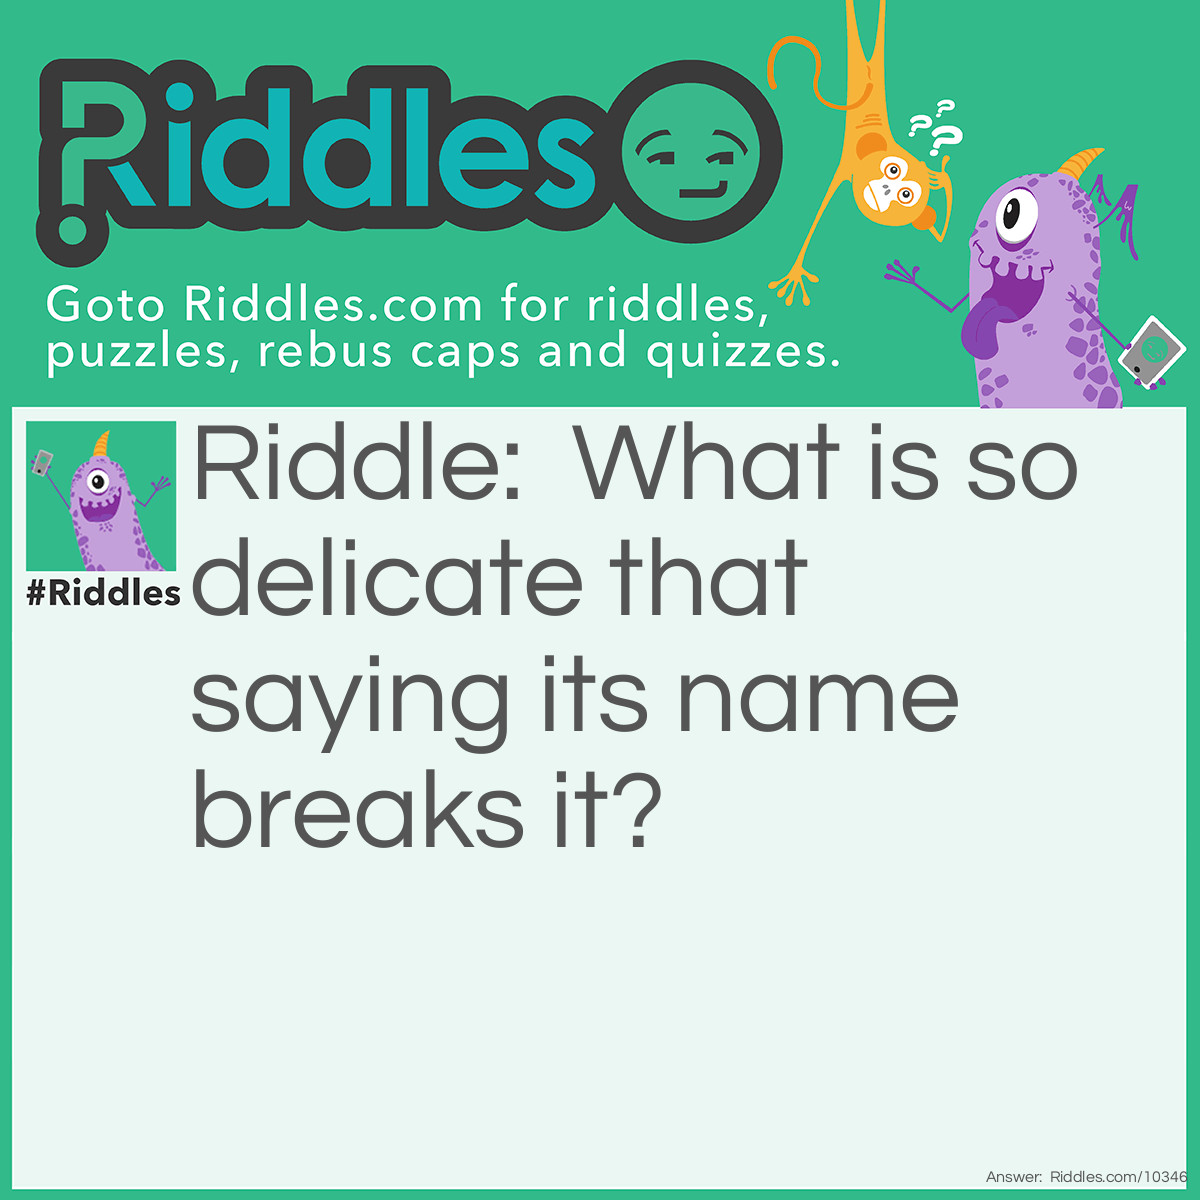 Riddle: What is so delicate that saying its name breaks it? Answer: Silence